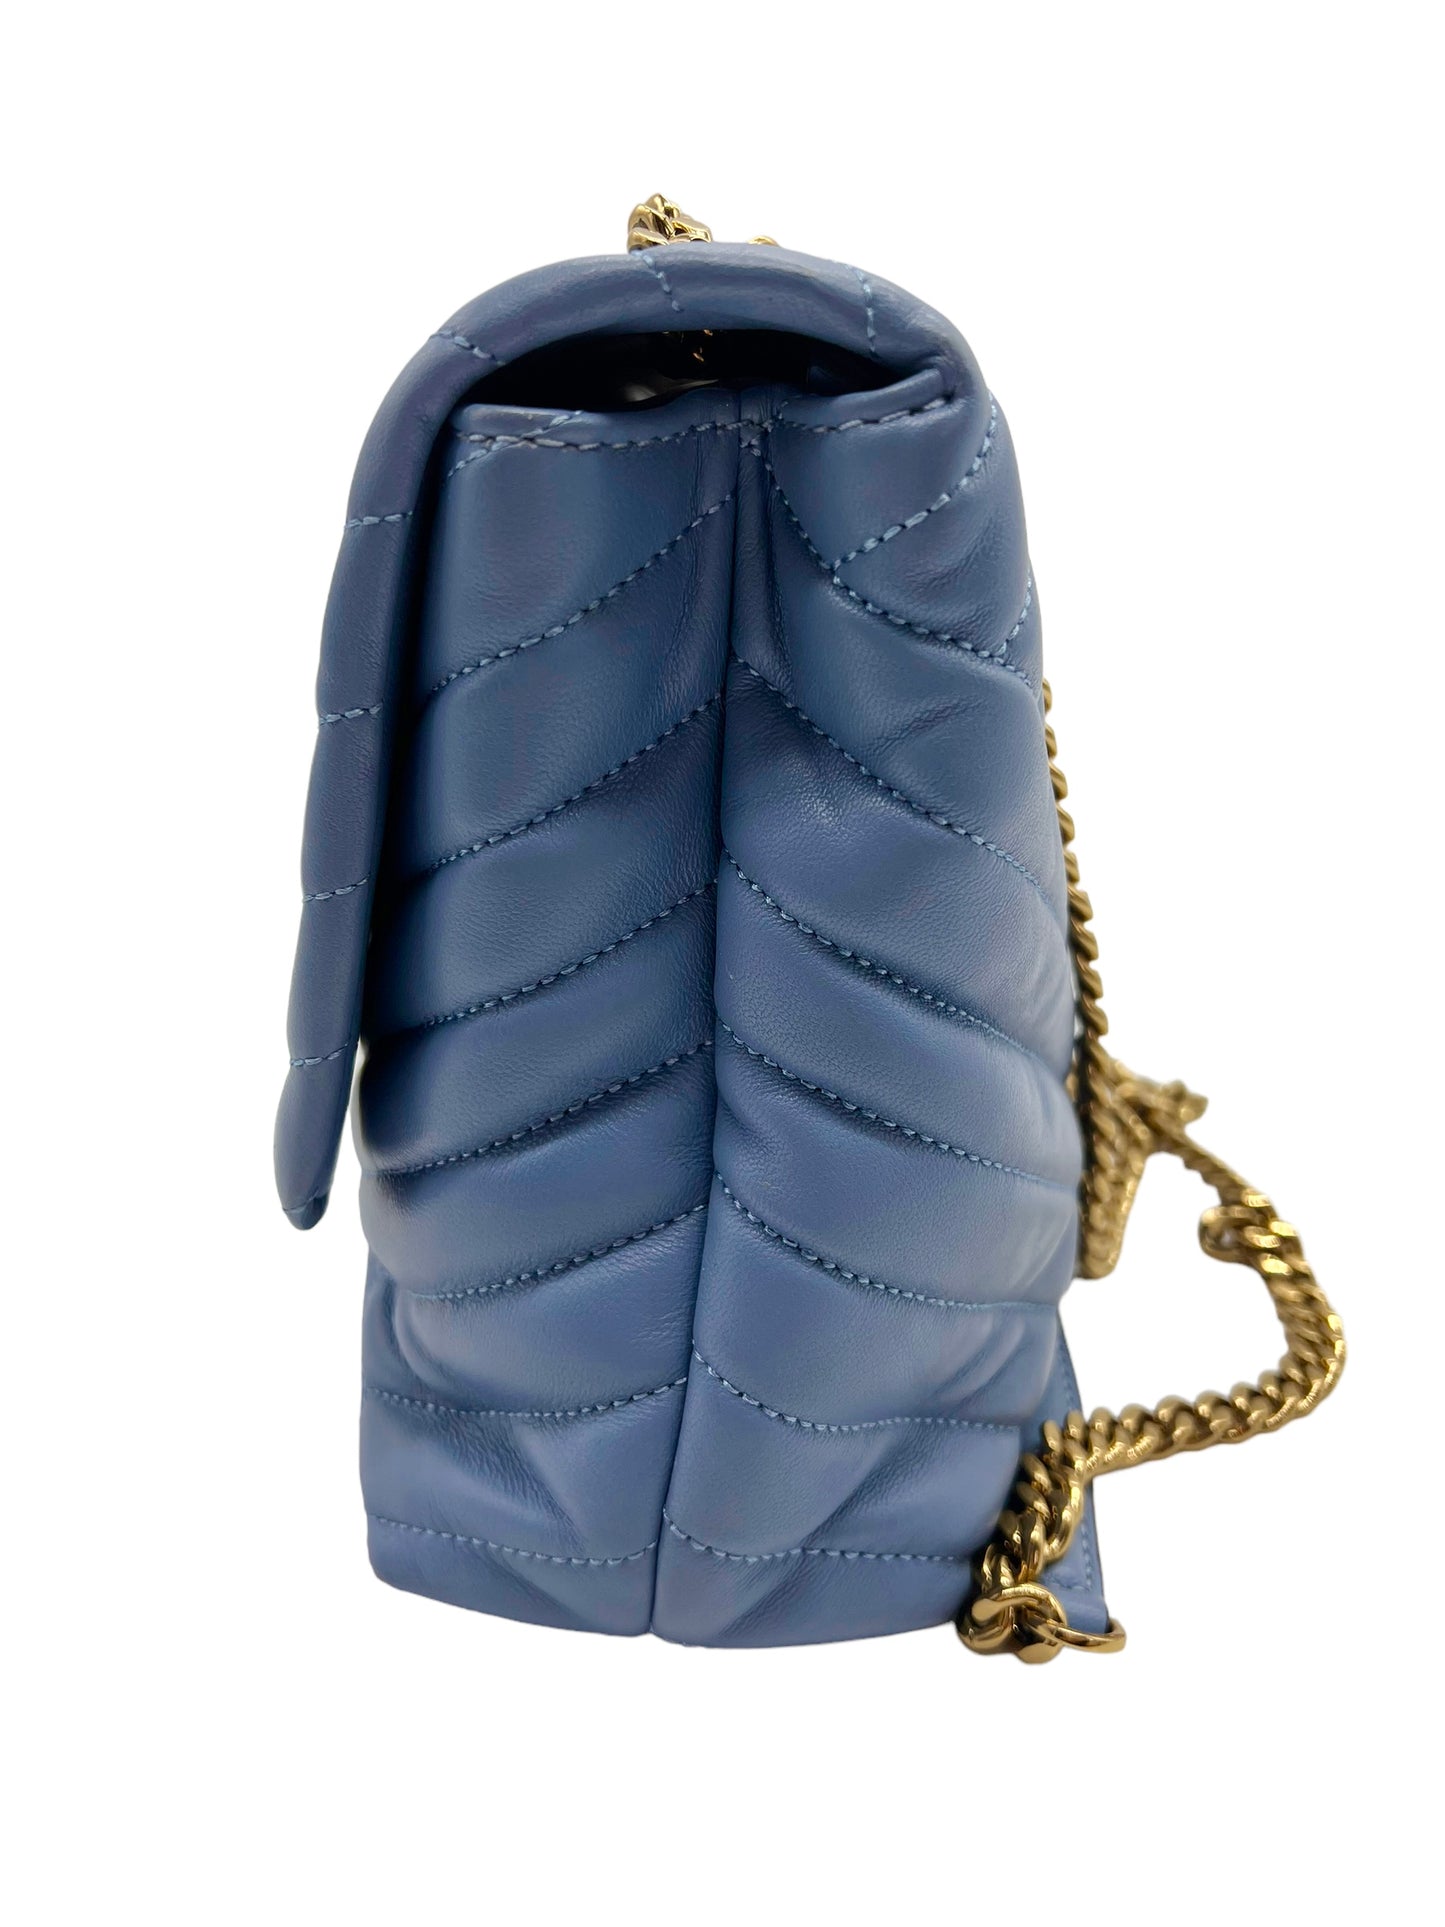 Tory Burch Blue Leather Kira Quilted Chain Shoulder Bag